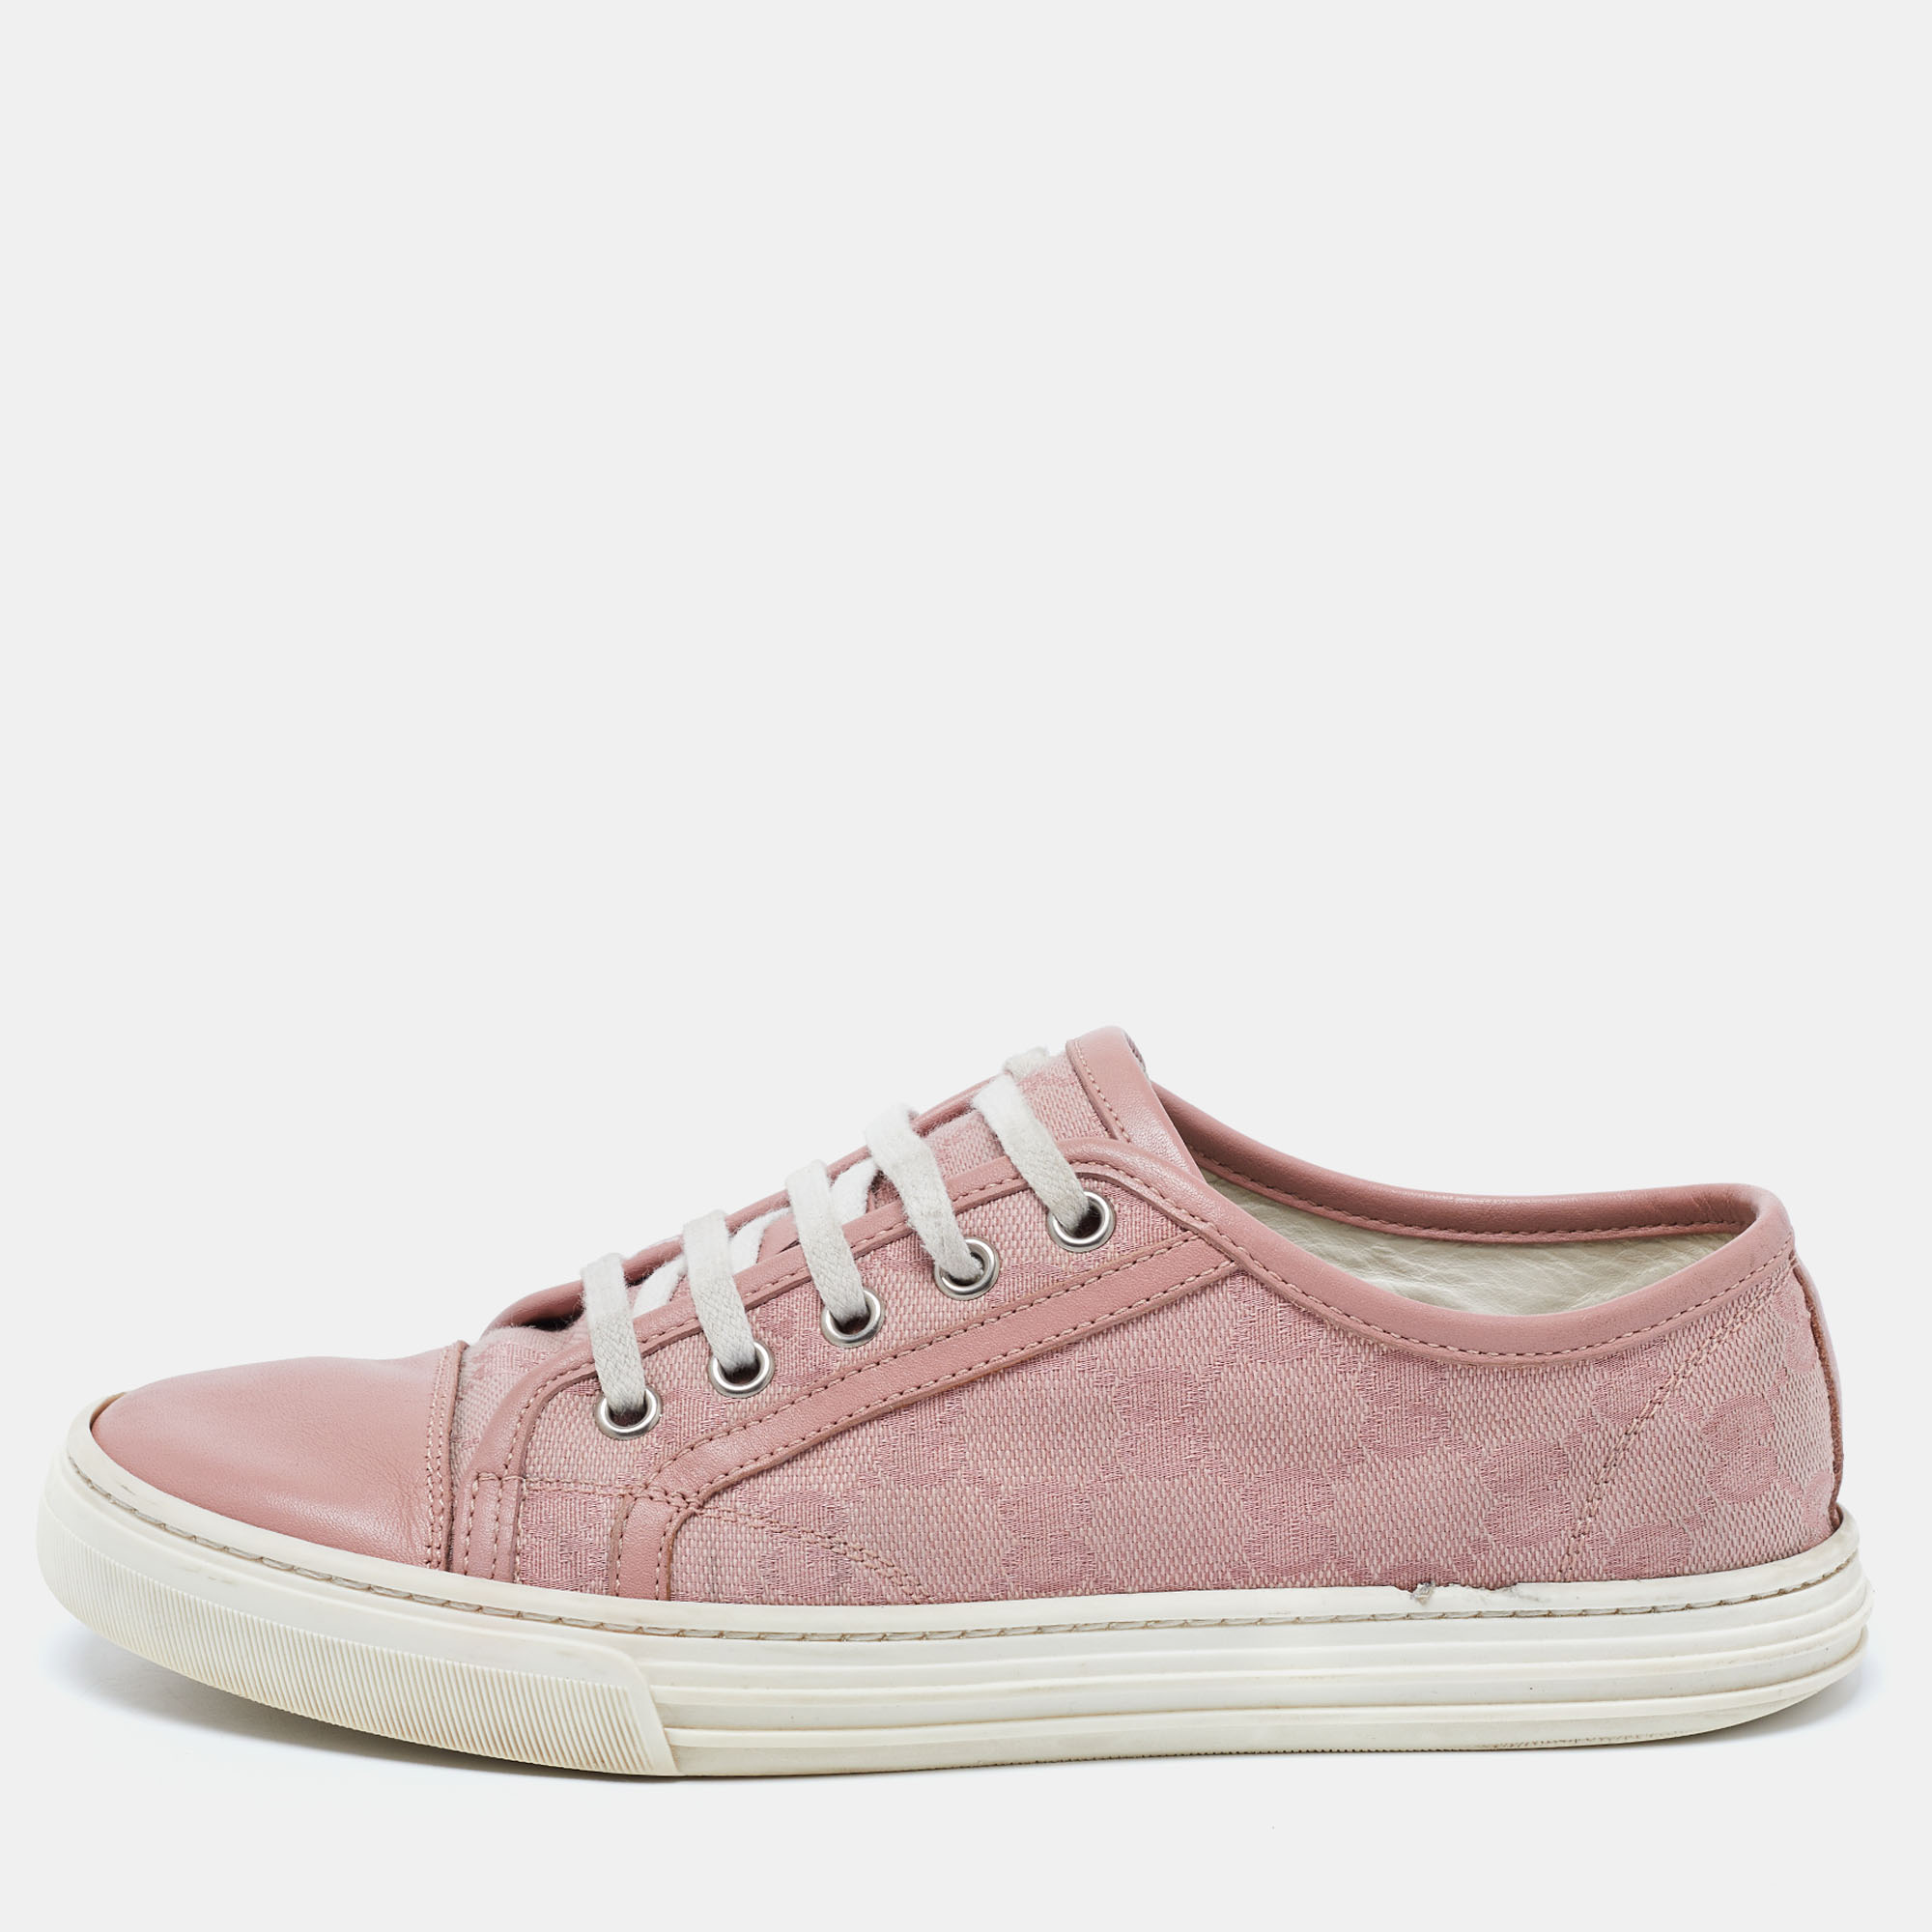 Pre-owned Gucci Pink Gg Canvas And Leather Low Top Sneakers Size 36.5